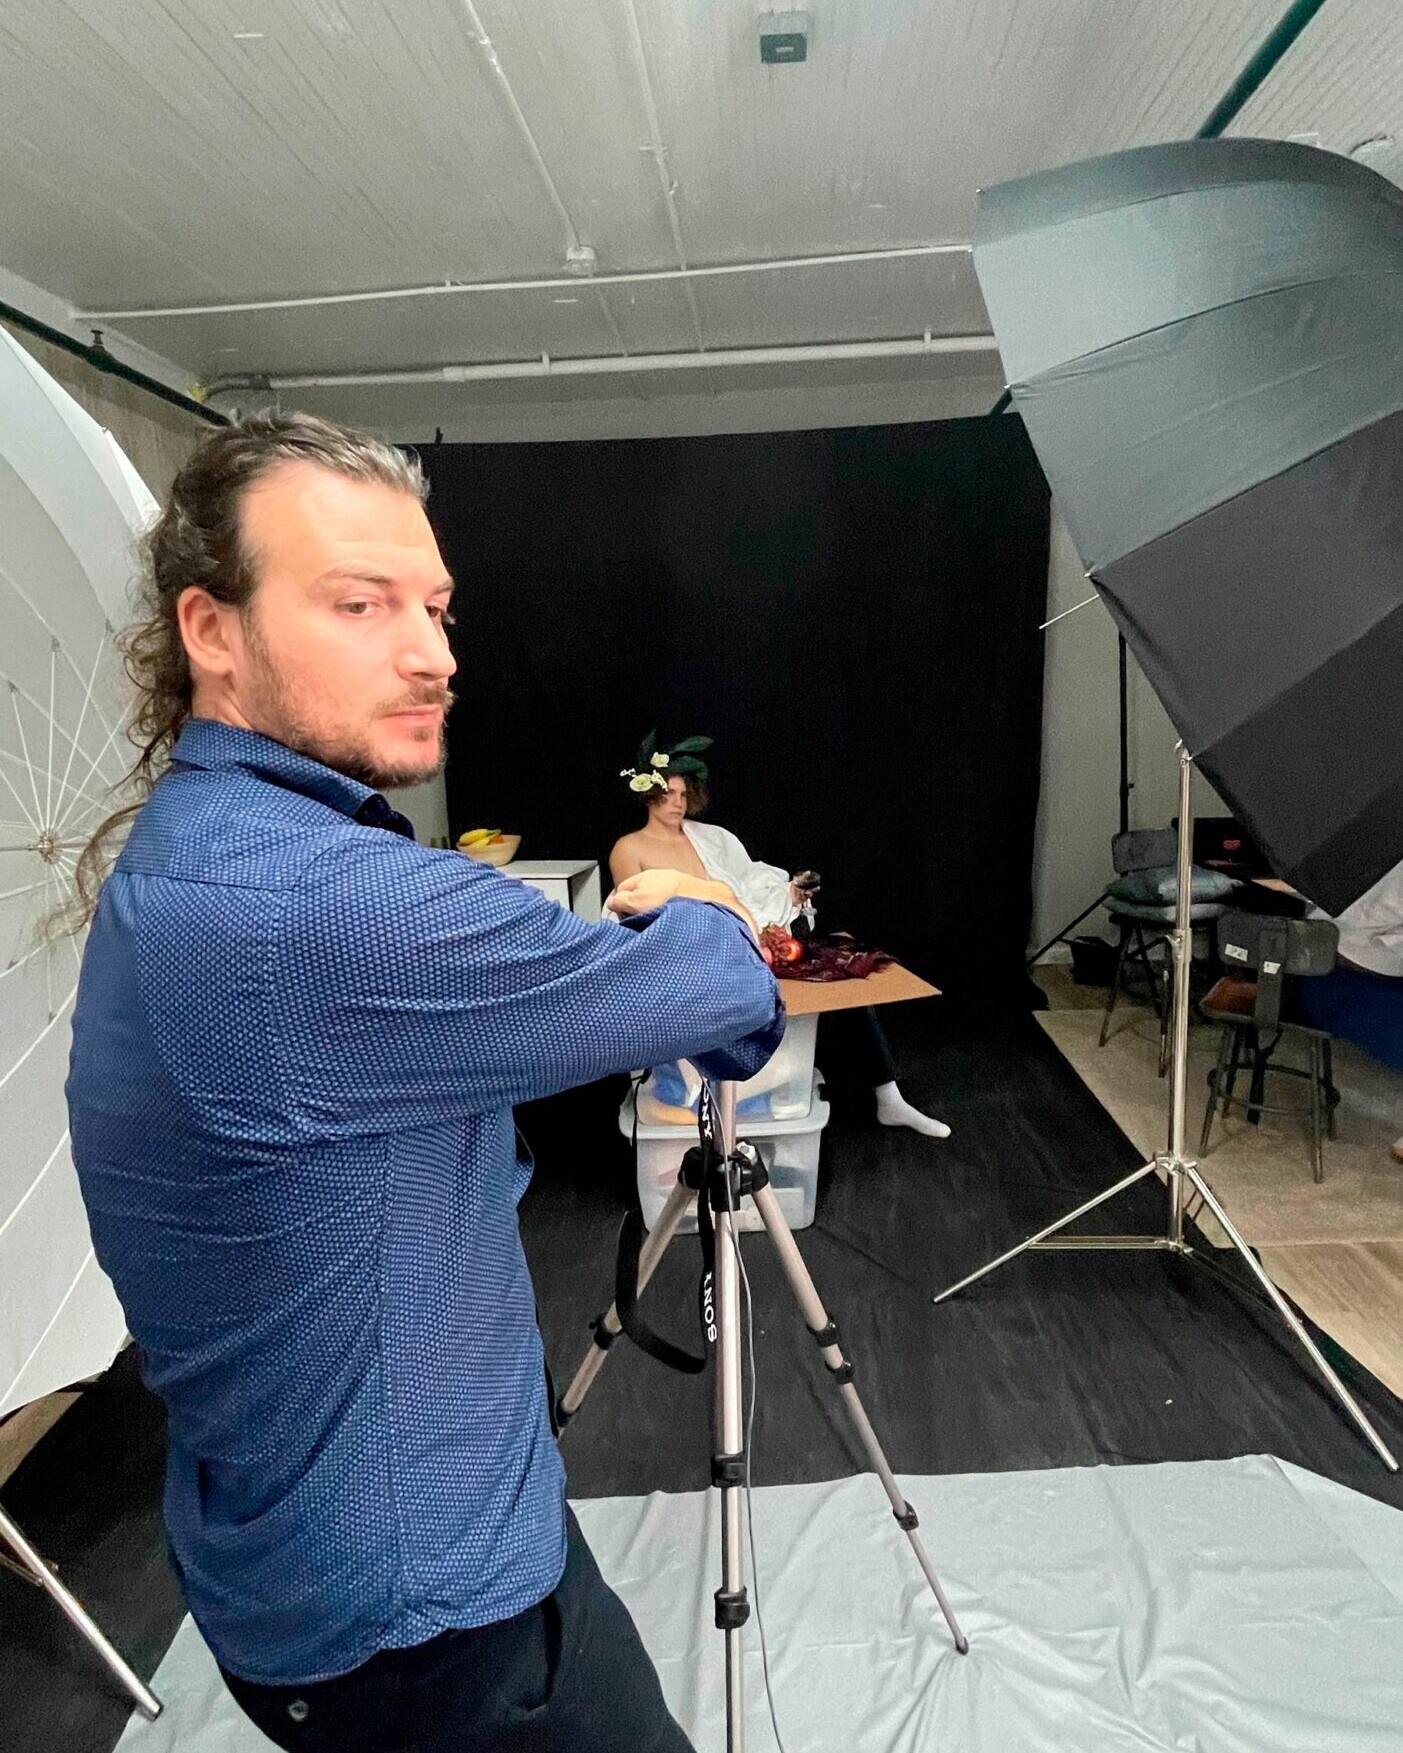 Alex Righetto during a photoshoot session before creating an oil painting